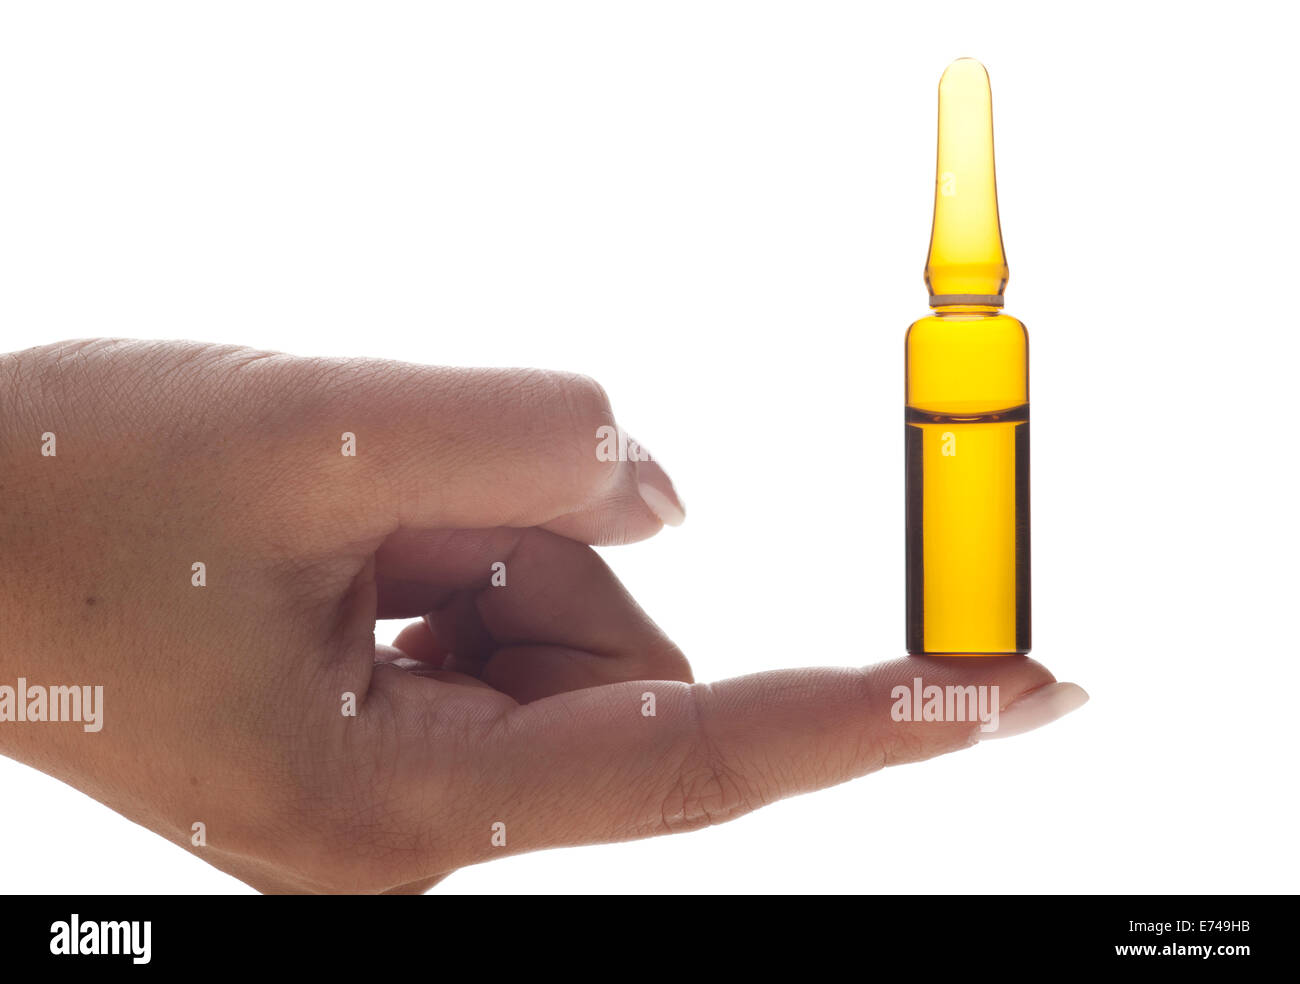 Hand holding an ampoule on a white background Stock Photo